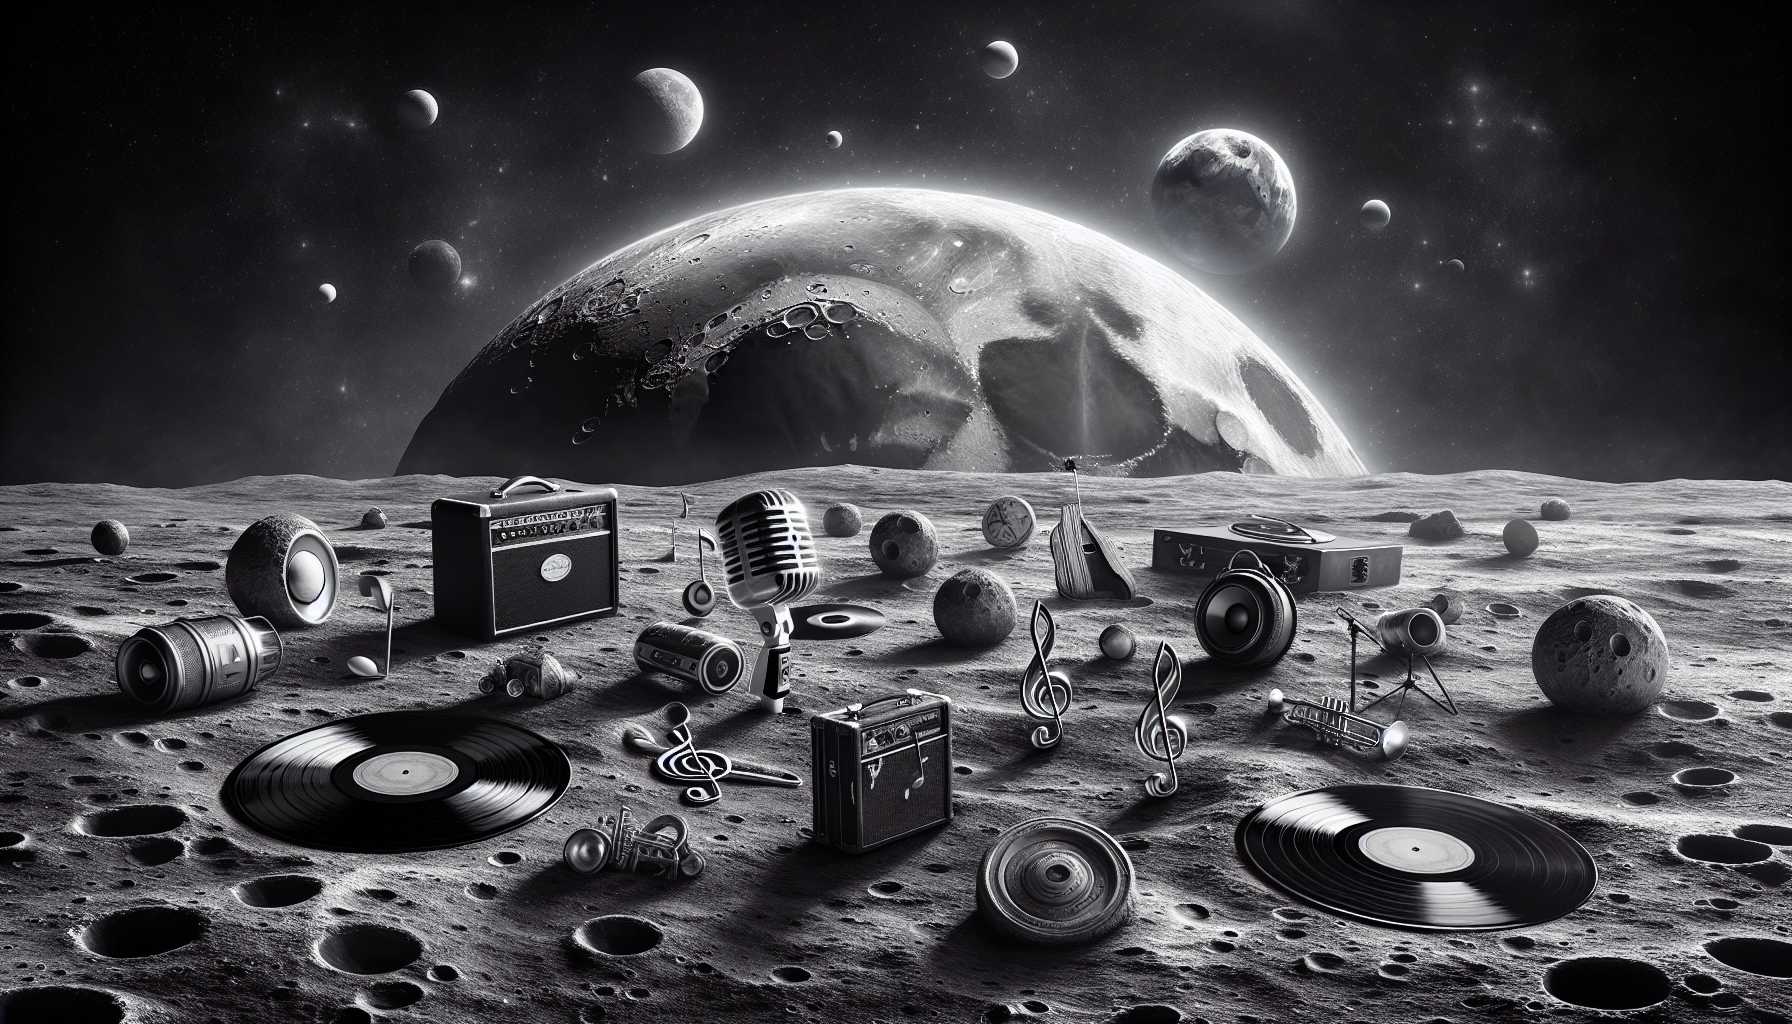 Classic vinyl records and music icons symbolically represented on the moon